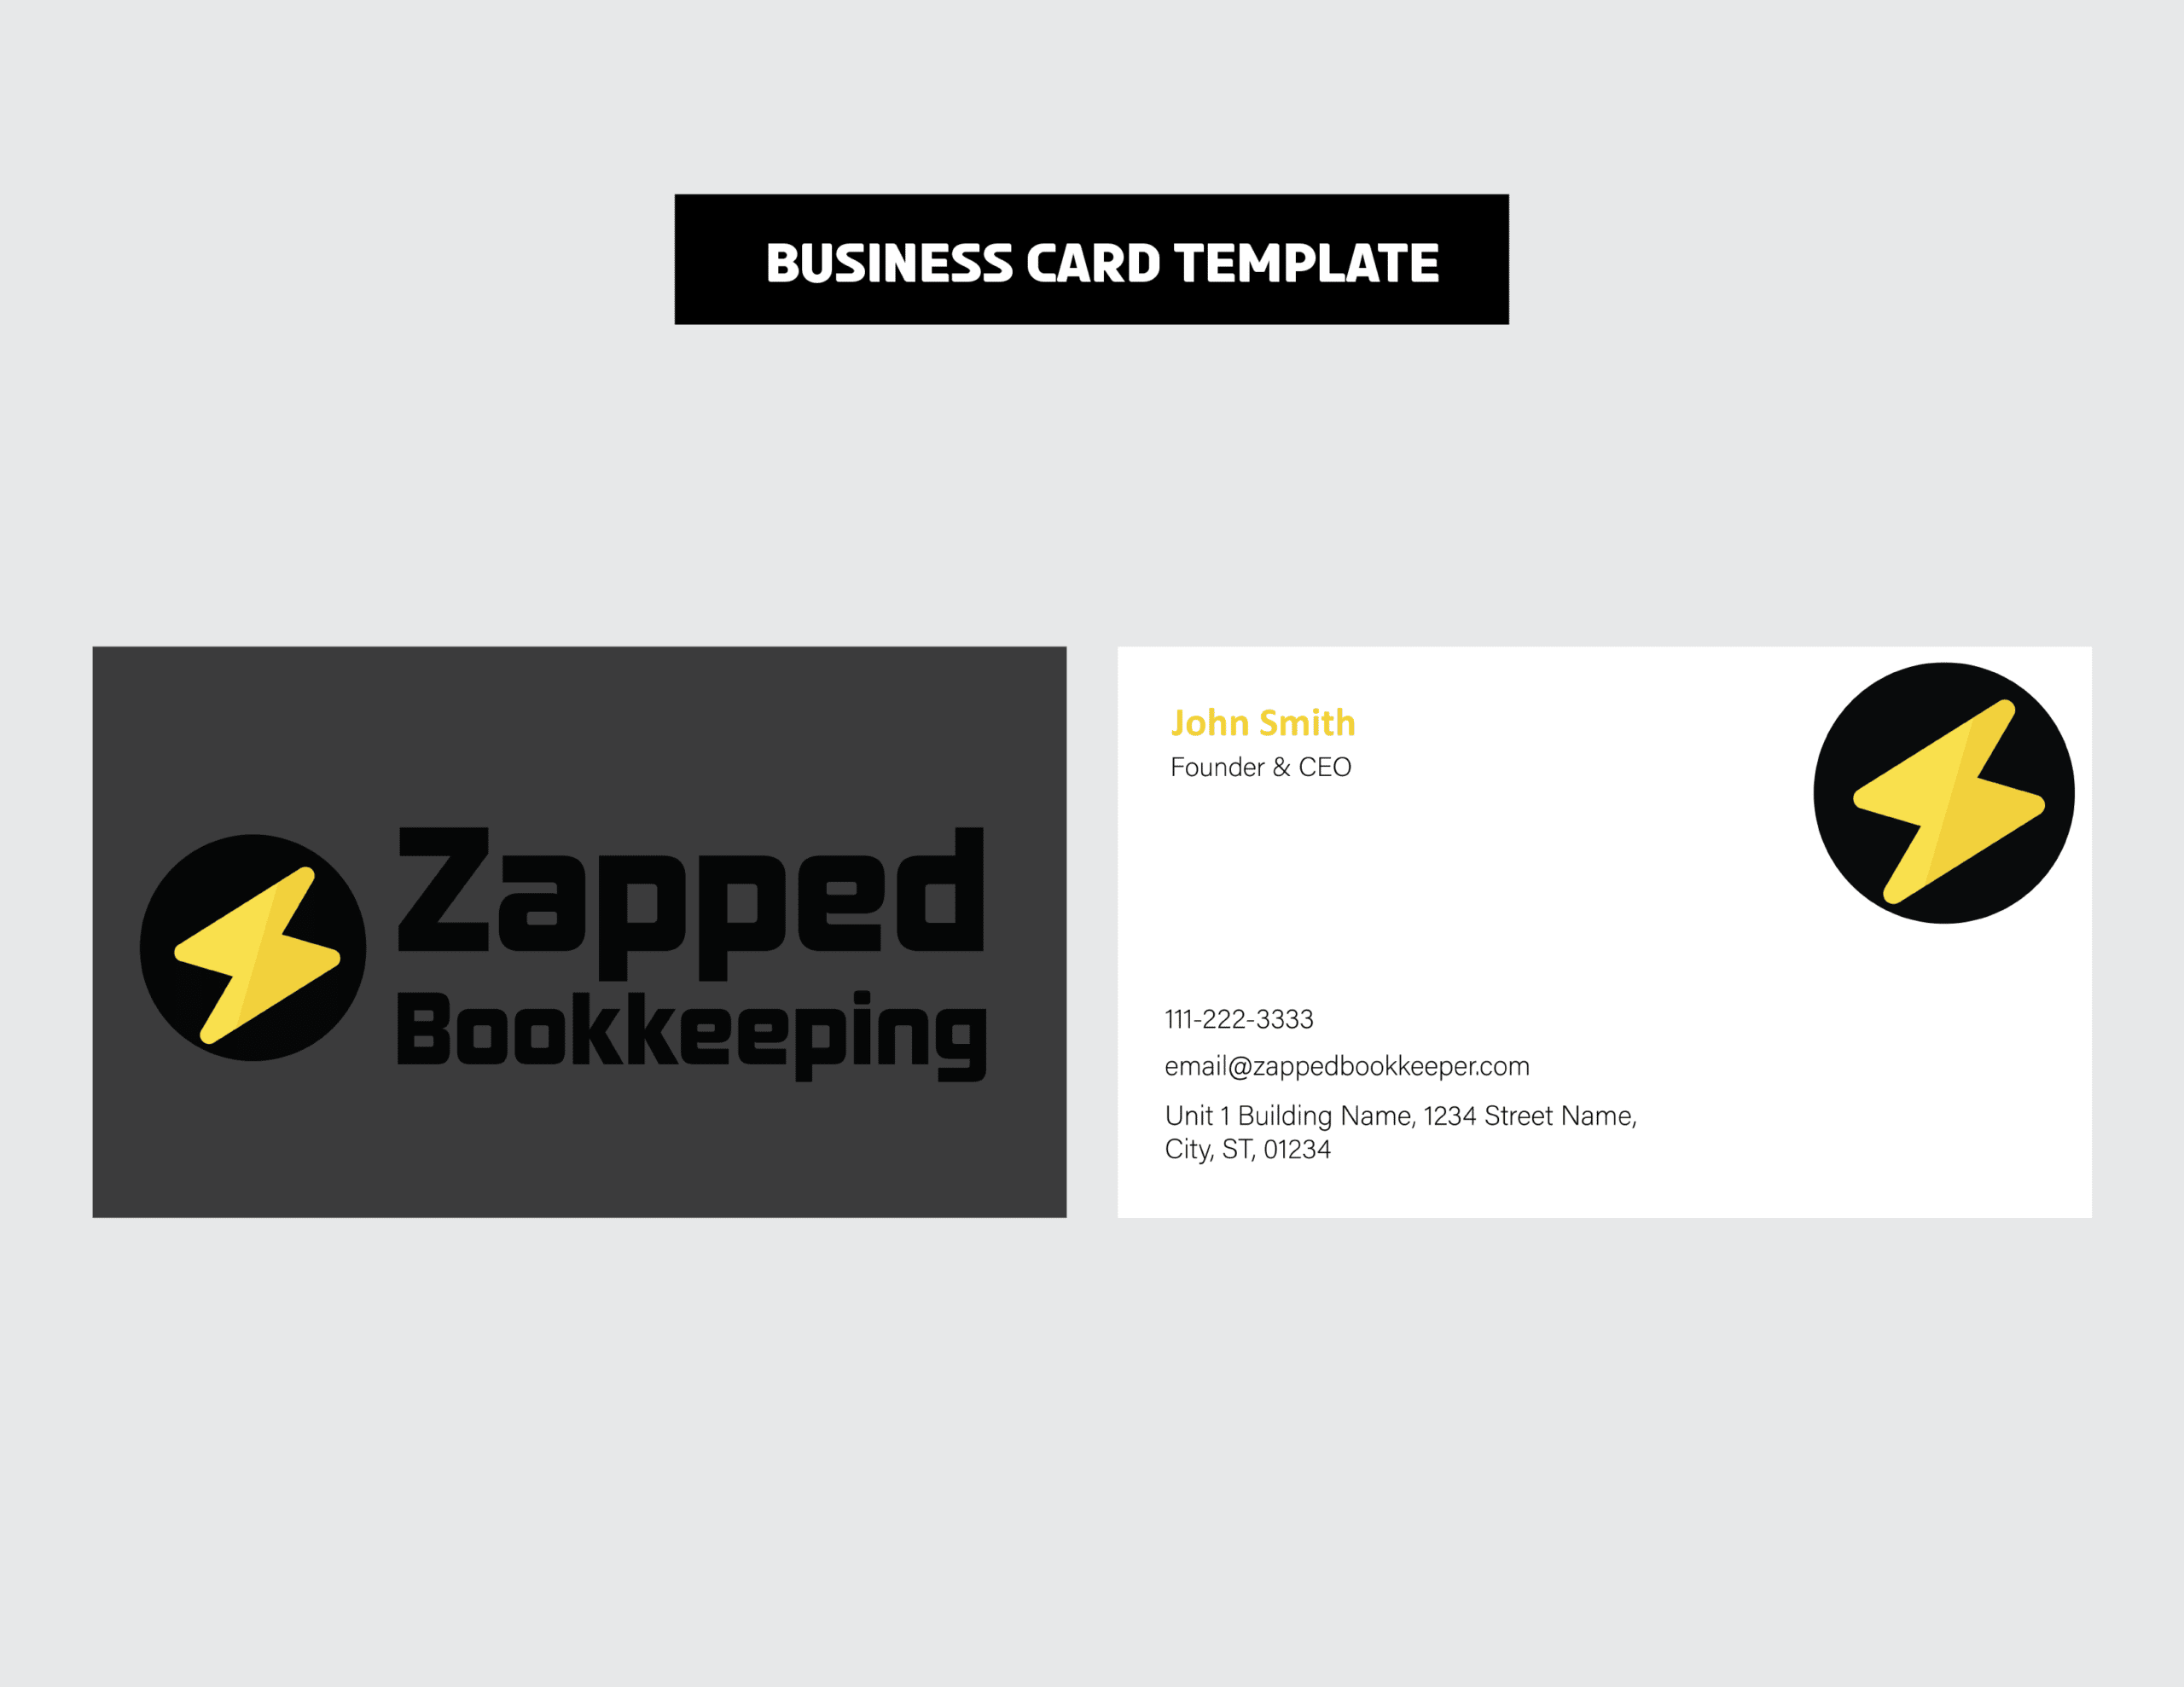 04_ZappedBookkeeping_Business Card Template